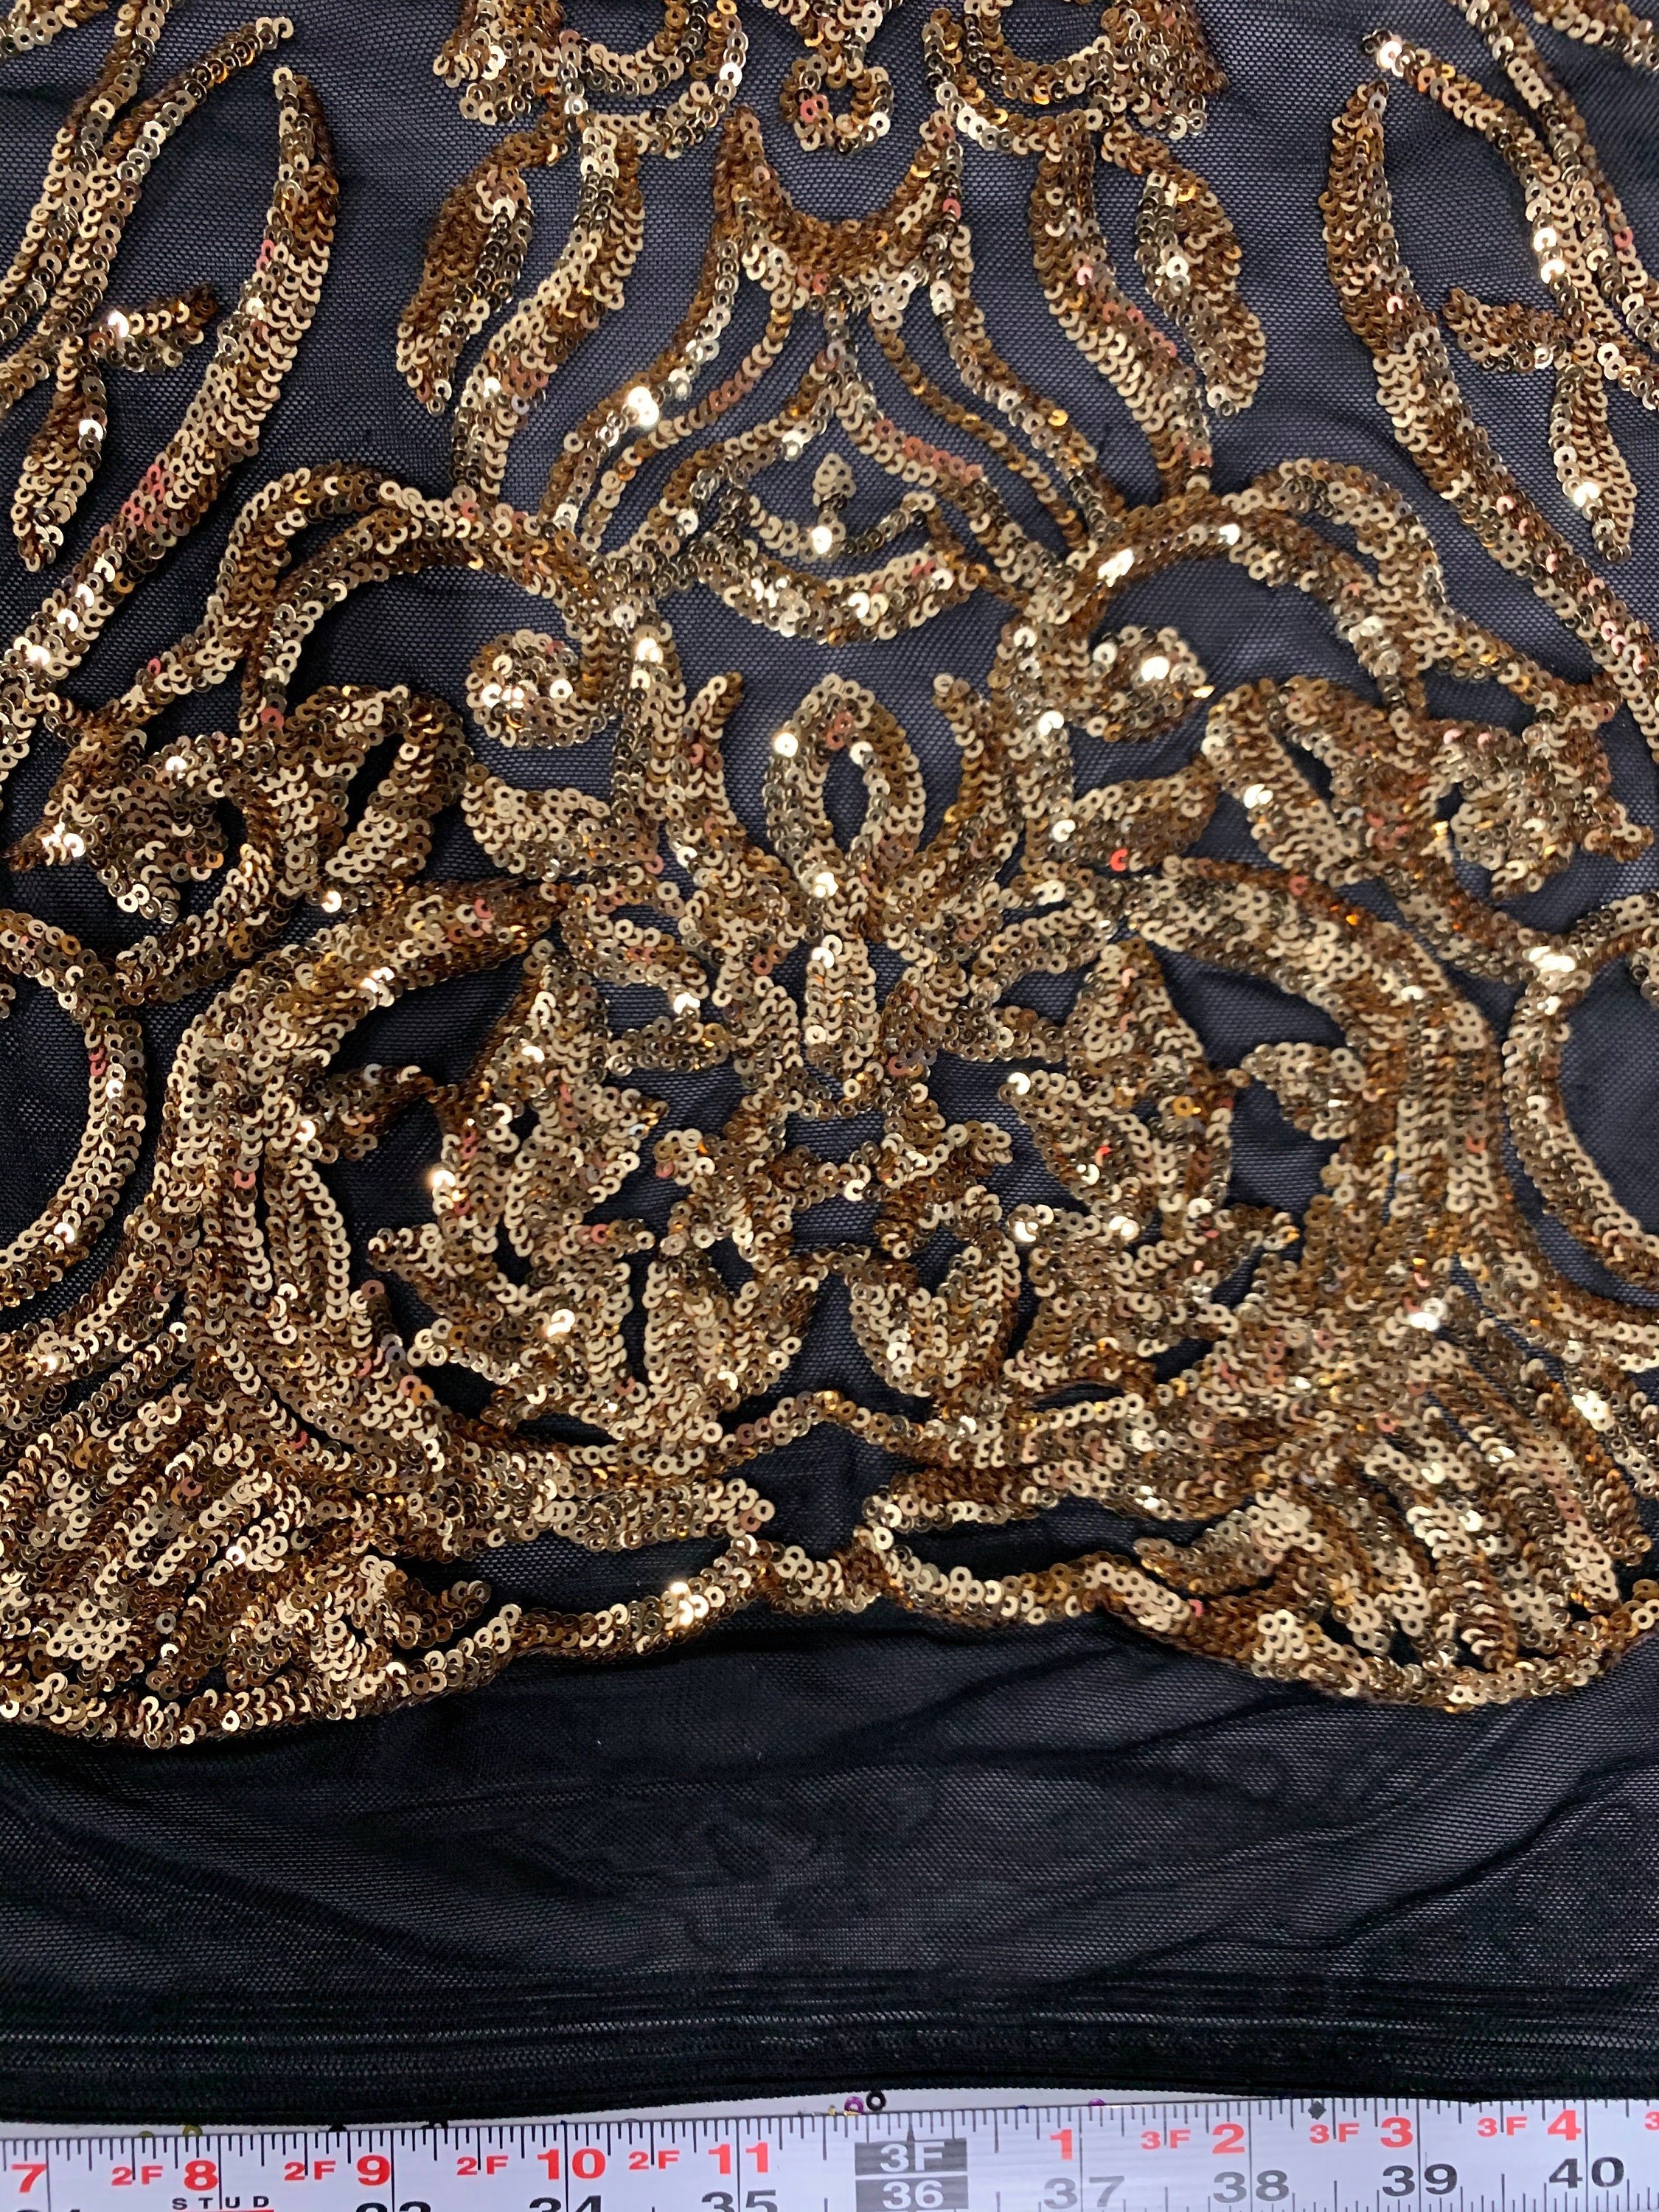 Phoebe GOLD Sequins on BLACK Mesh Lace Fabric by the Yard | Etsy